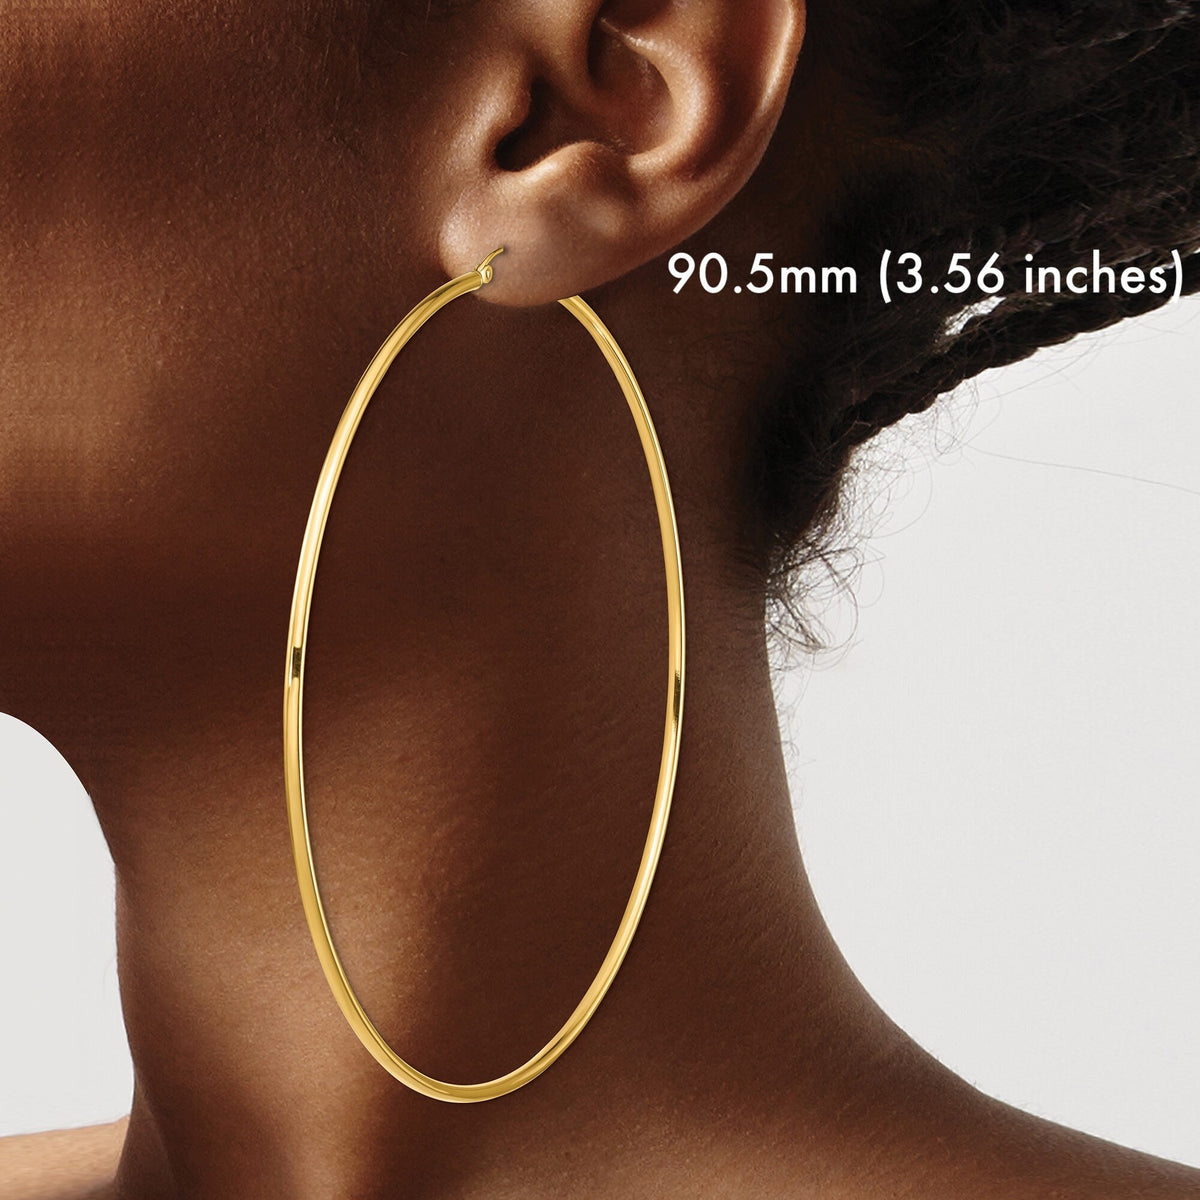 14k Yellow Gold Classic Hoops with Wire Clutch - Polished 2mm Yellow Gold Earrings (Not Plated or Filled) Gift Box Included - Ships Next Day